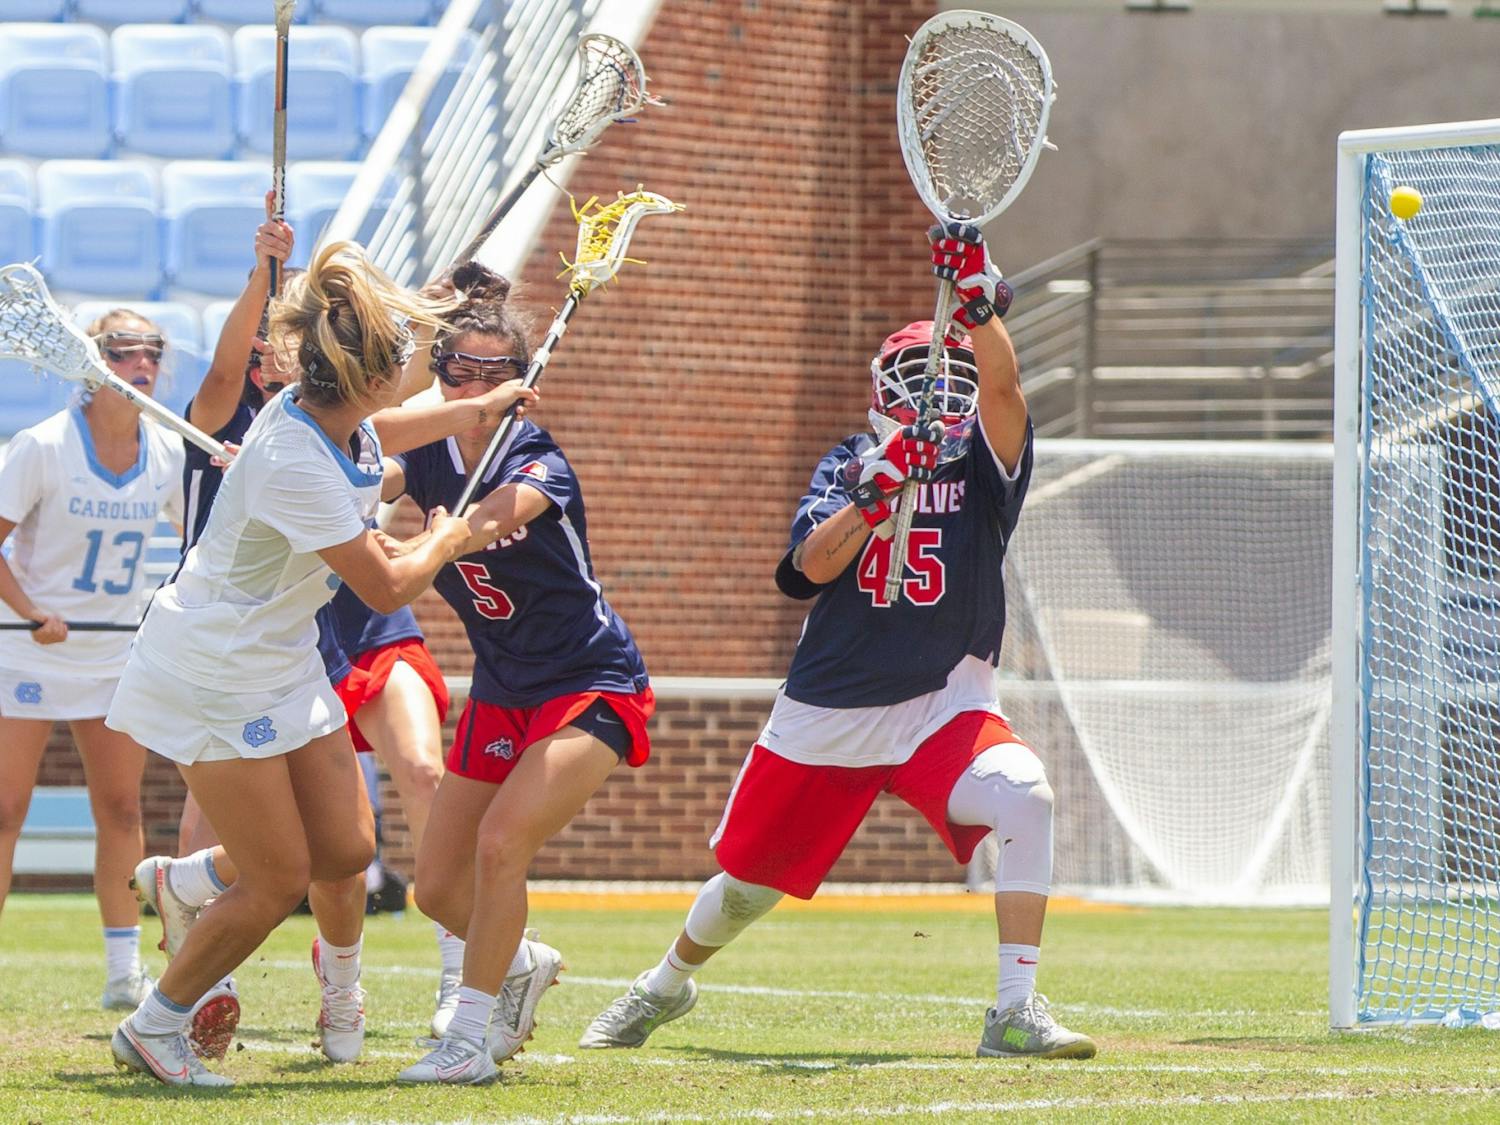 UNC senior attacker Jamie Ortega (3) scores a goal at the quarterfinals of the NCAA tournament against Stony Brook at the Dorrance Field in Chapel Hill on Saturday May 22, 2021. The Tar Heels won 14-11.